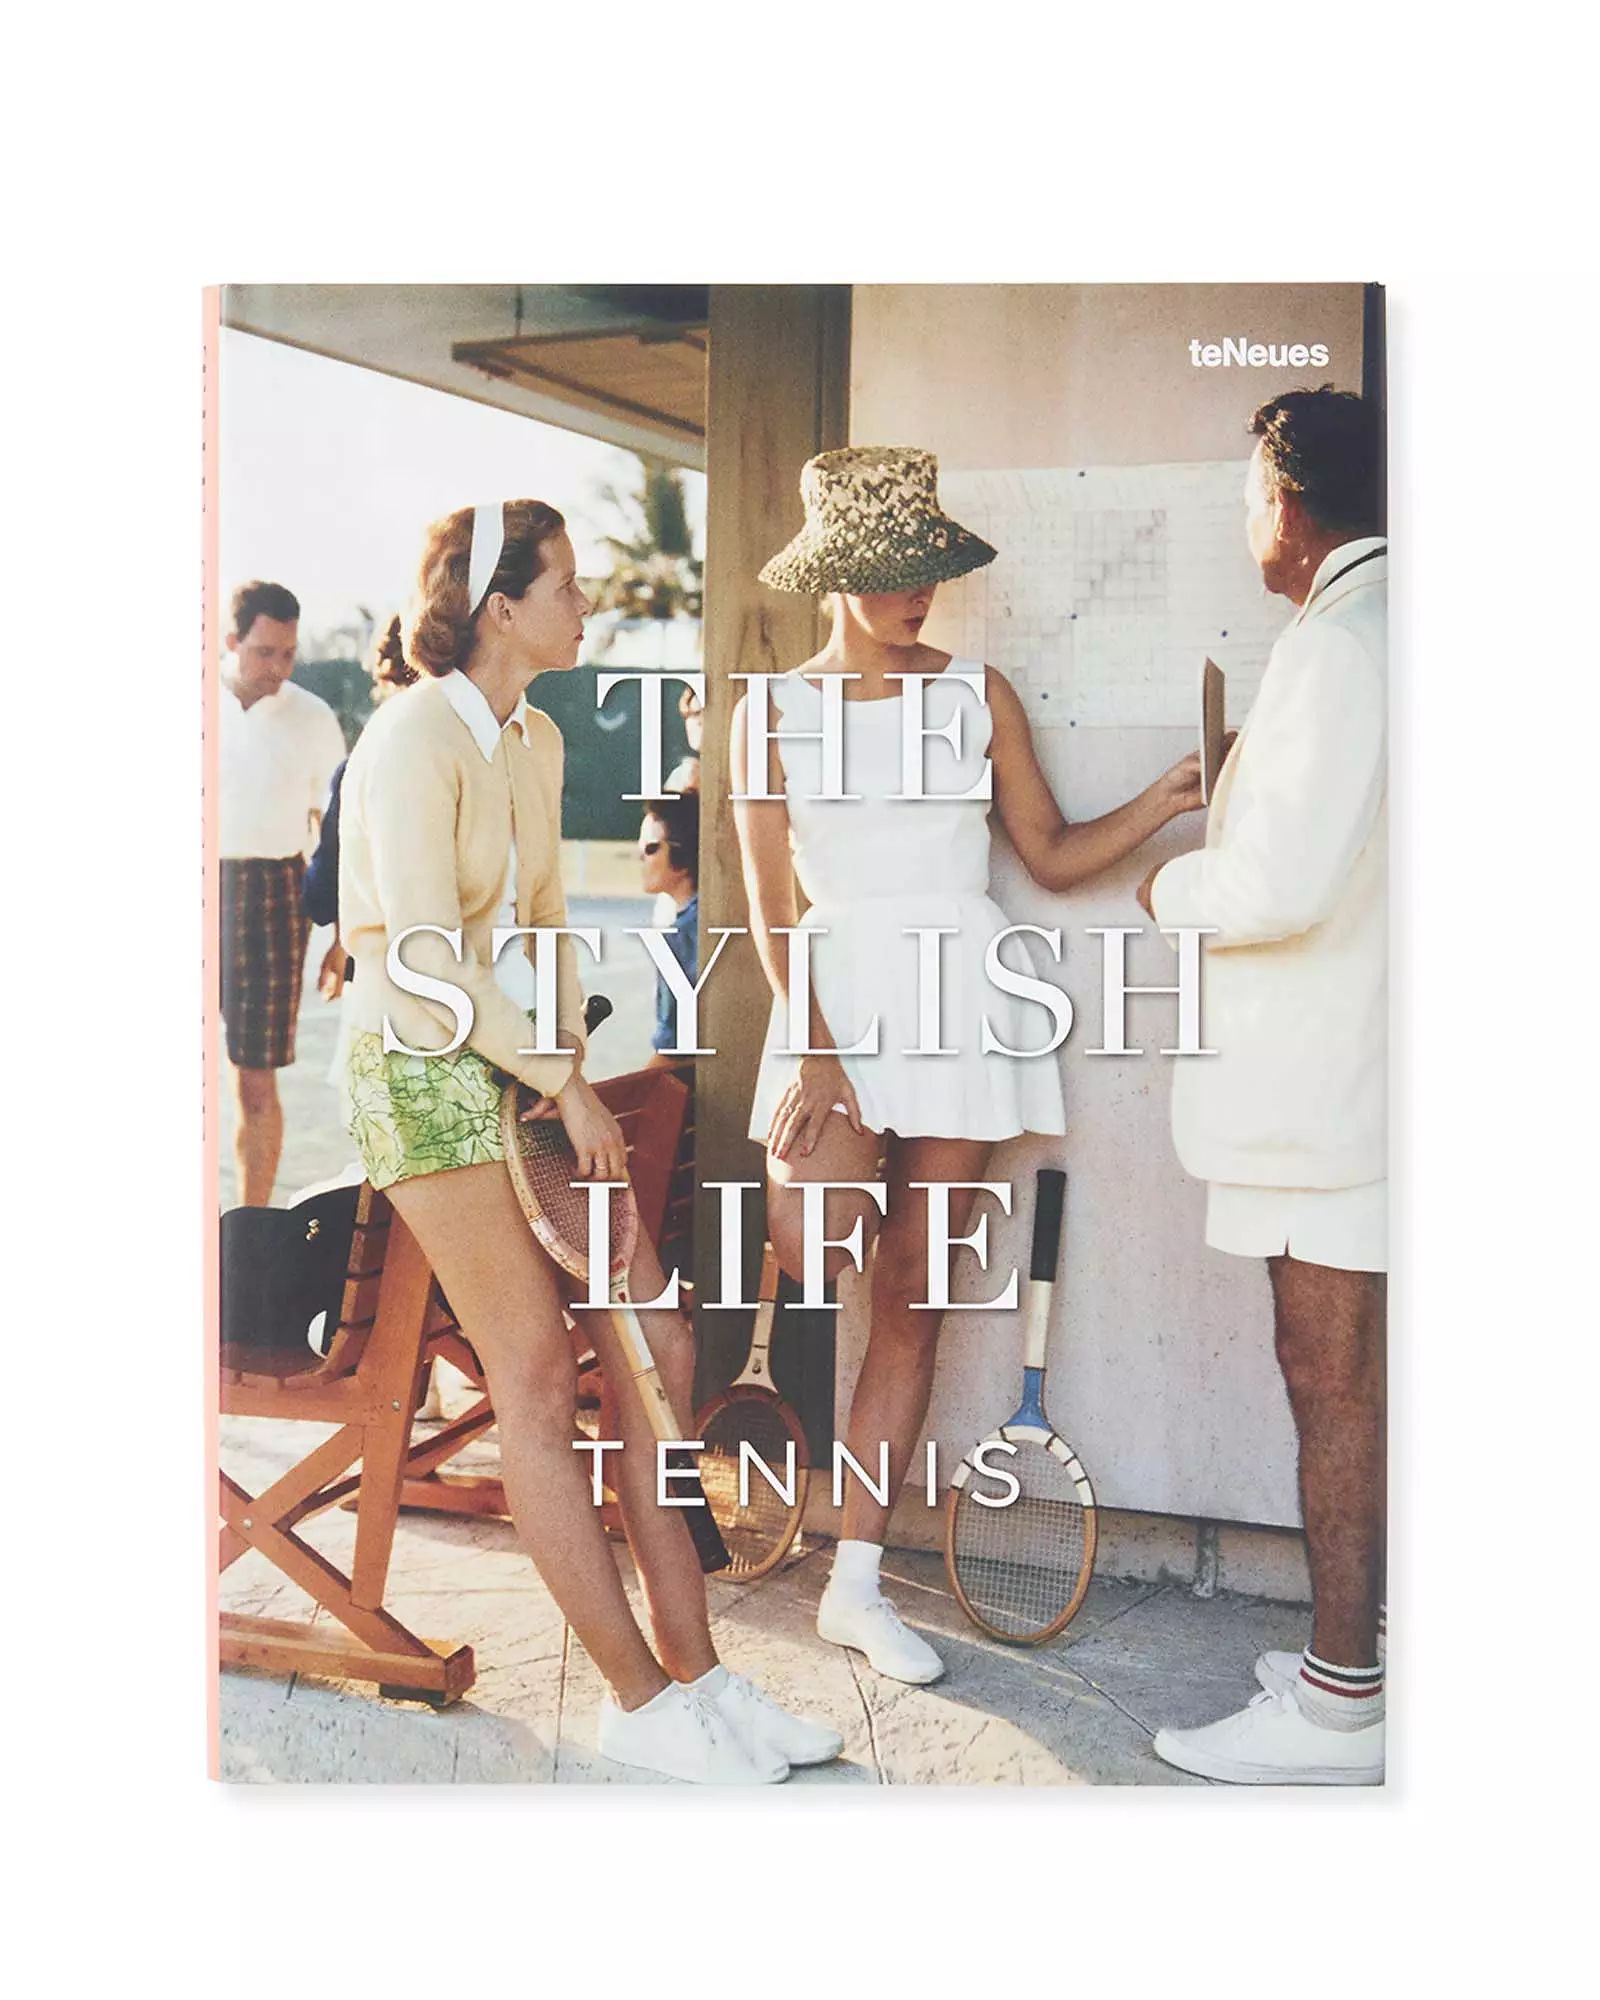 "The Stylish Life" Series by Ben Rothenberg, Christian Chensvold & Gabriella Le Breton | Serena and Lily